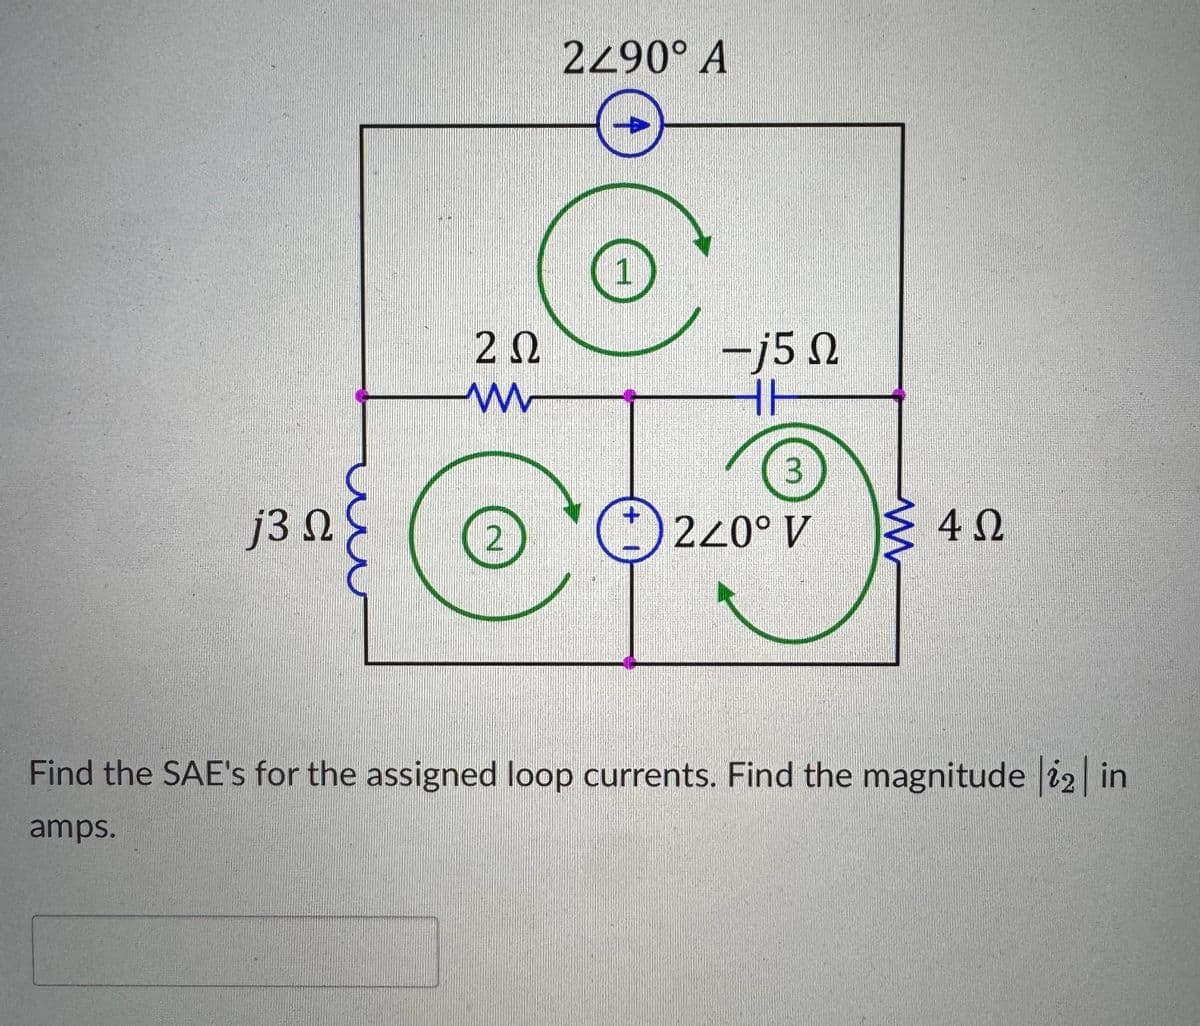 2≤90° A
2 Ω
w
1
-15 N
3
j3 Ω
2
220° V
W
4Ω
Find the SAE's for the assigned loop currents. Find the magnitude |22| in
amps.